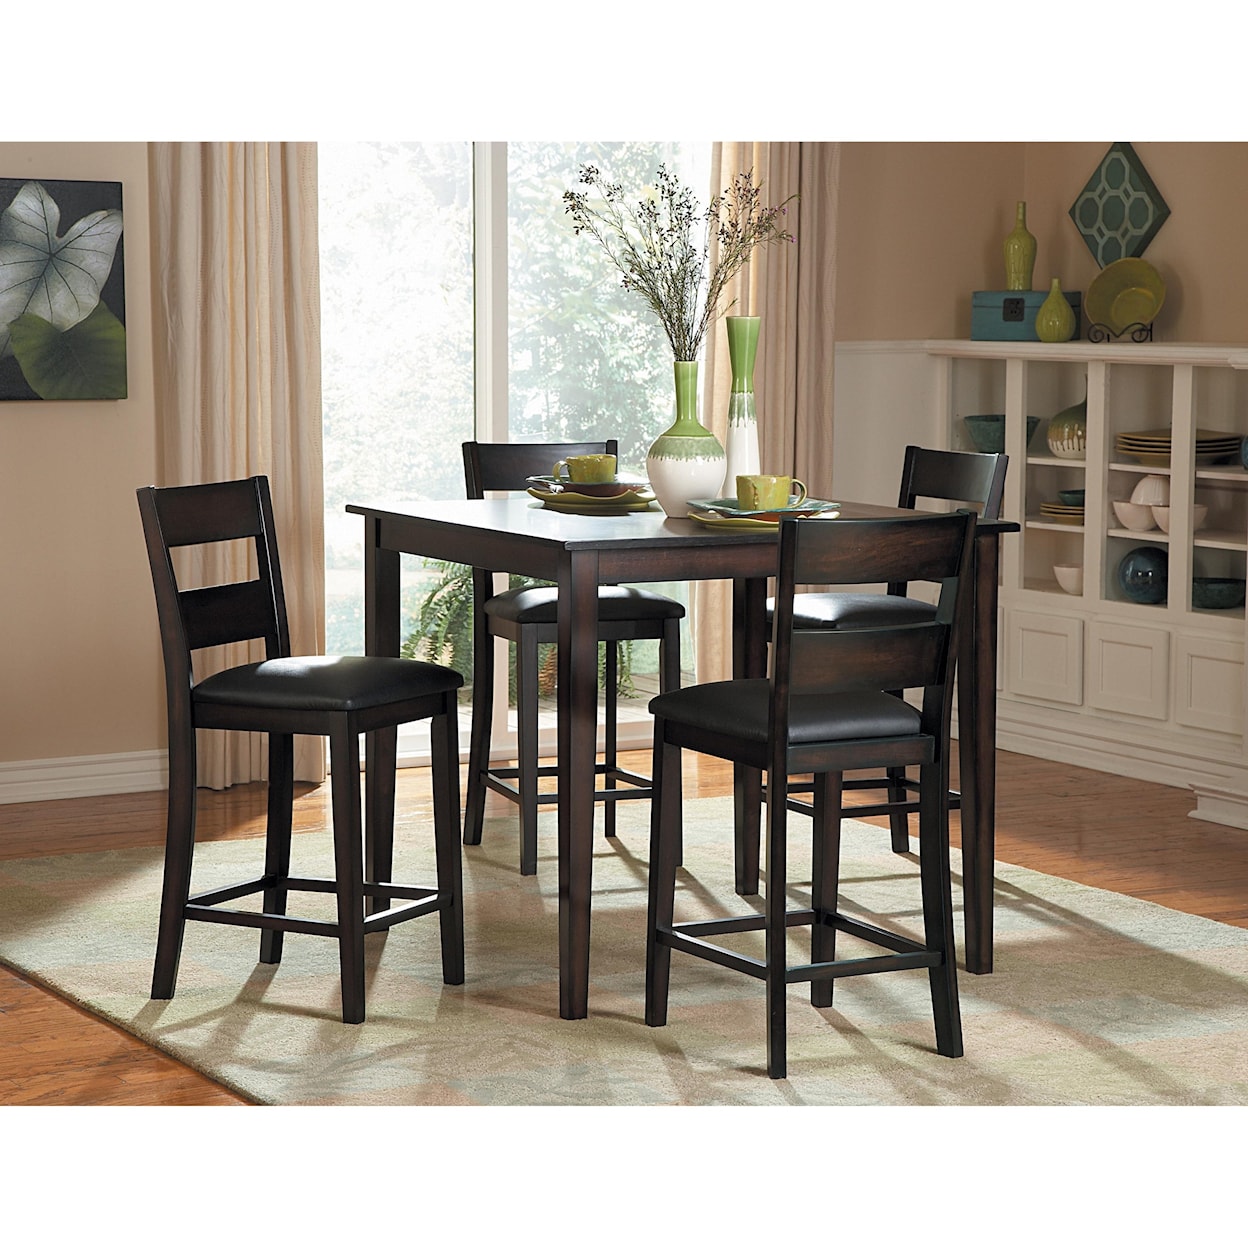 Homelegance Furniture Griffin 5Pc Counter Height Table and Chair Set